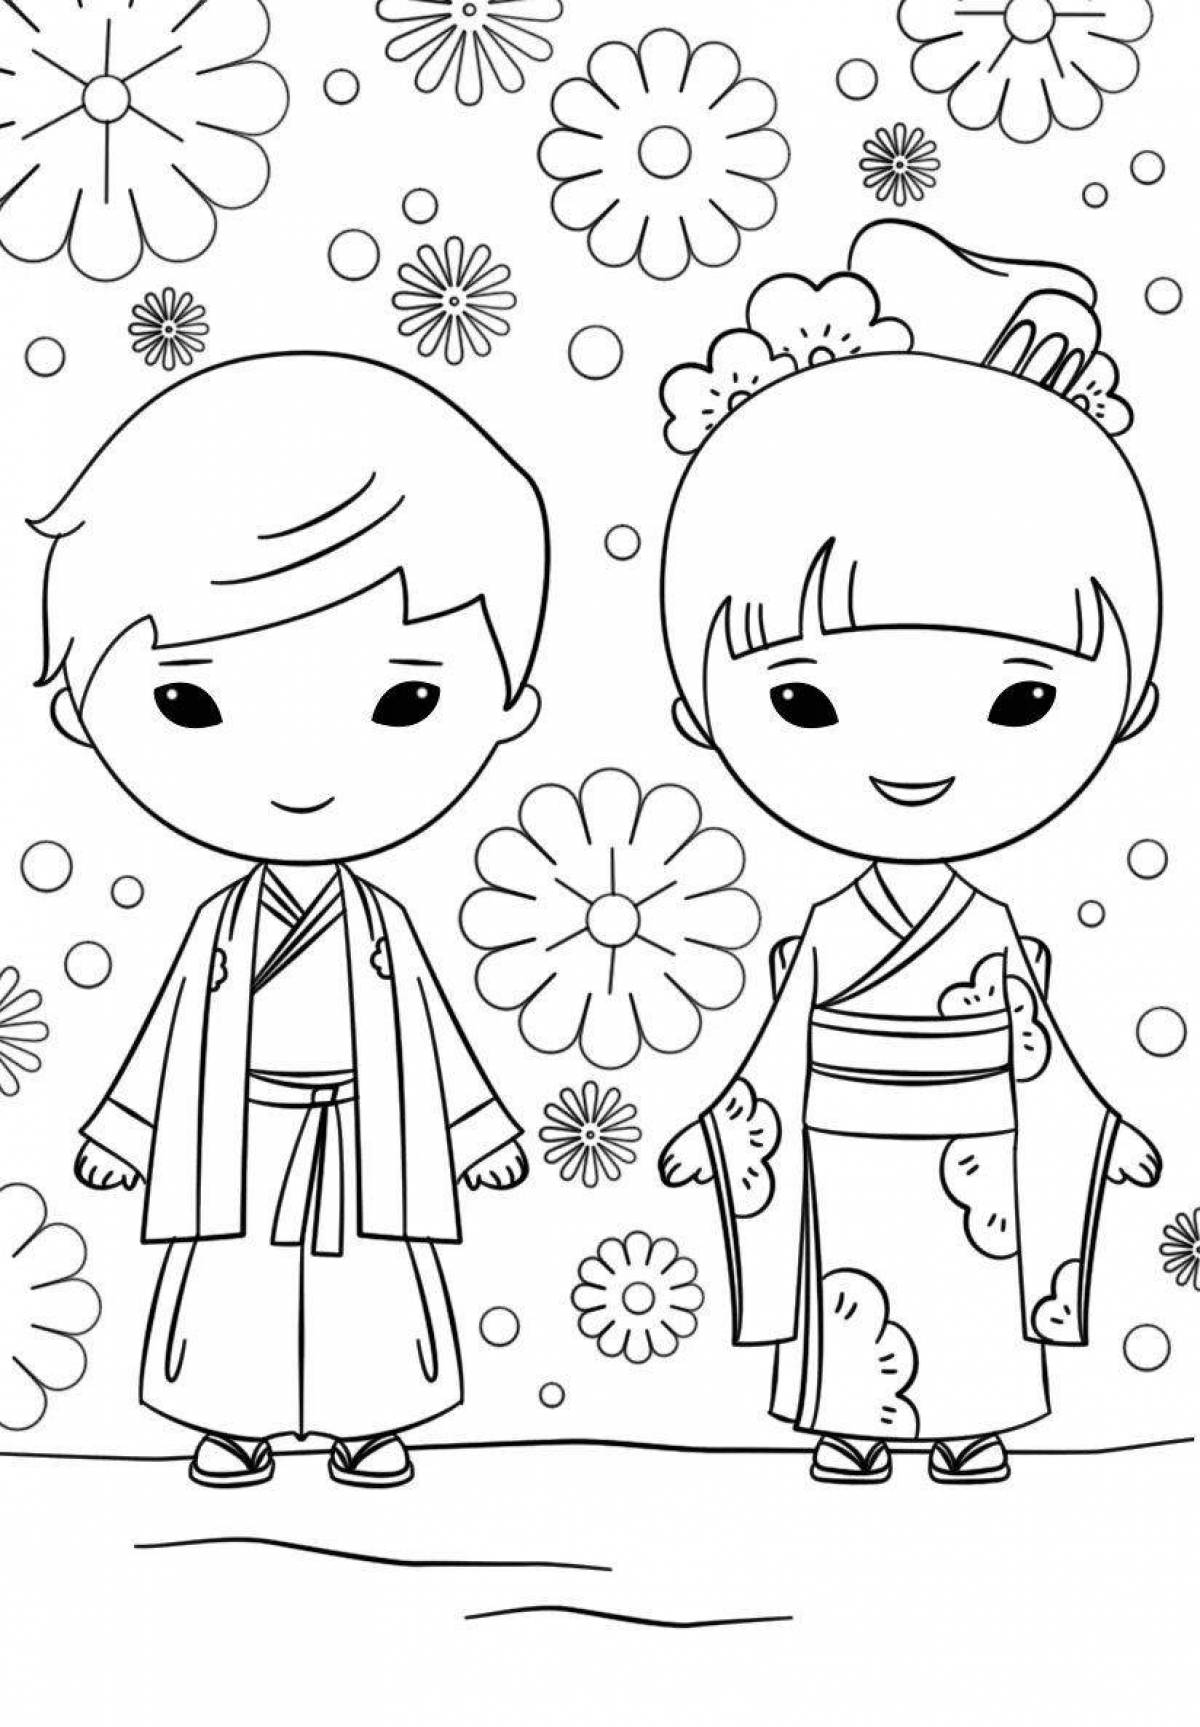 Bright Japanese girl coloring book